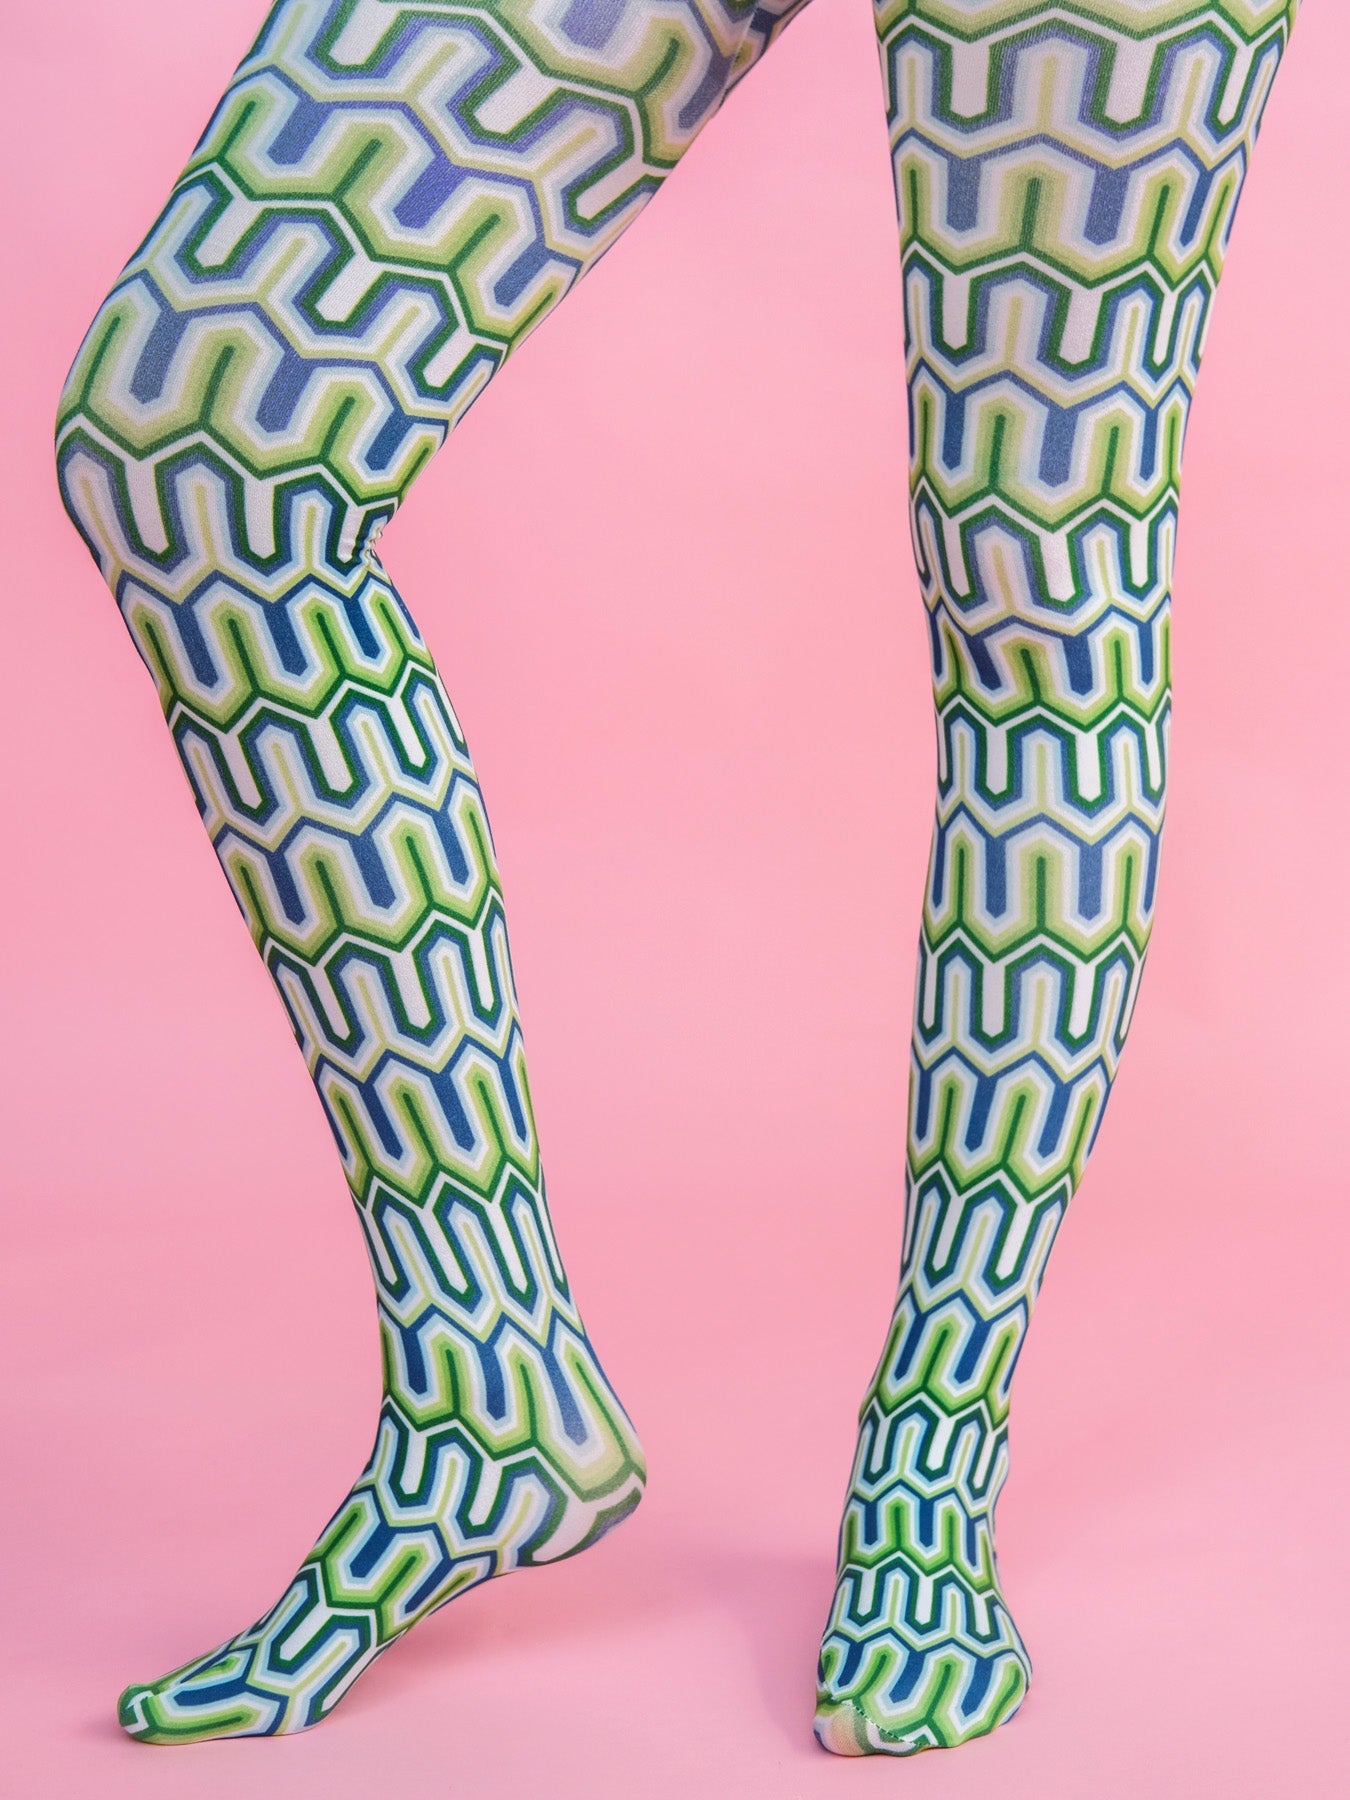 Women's Tights & Leggings, Patterned Tights